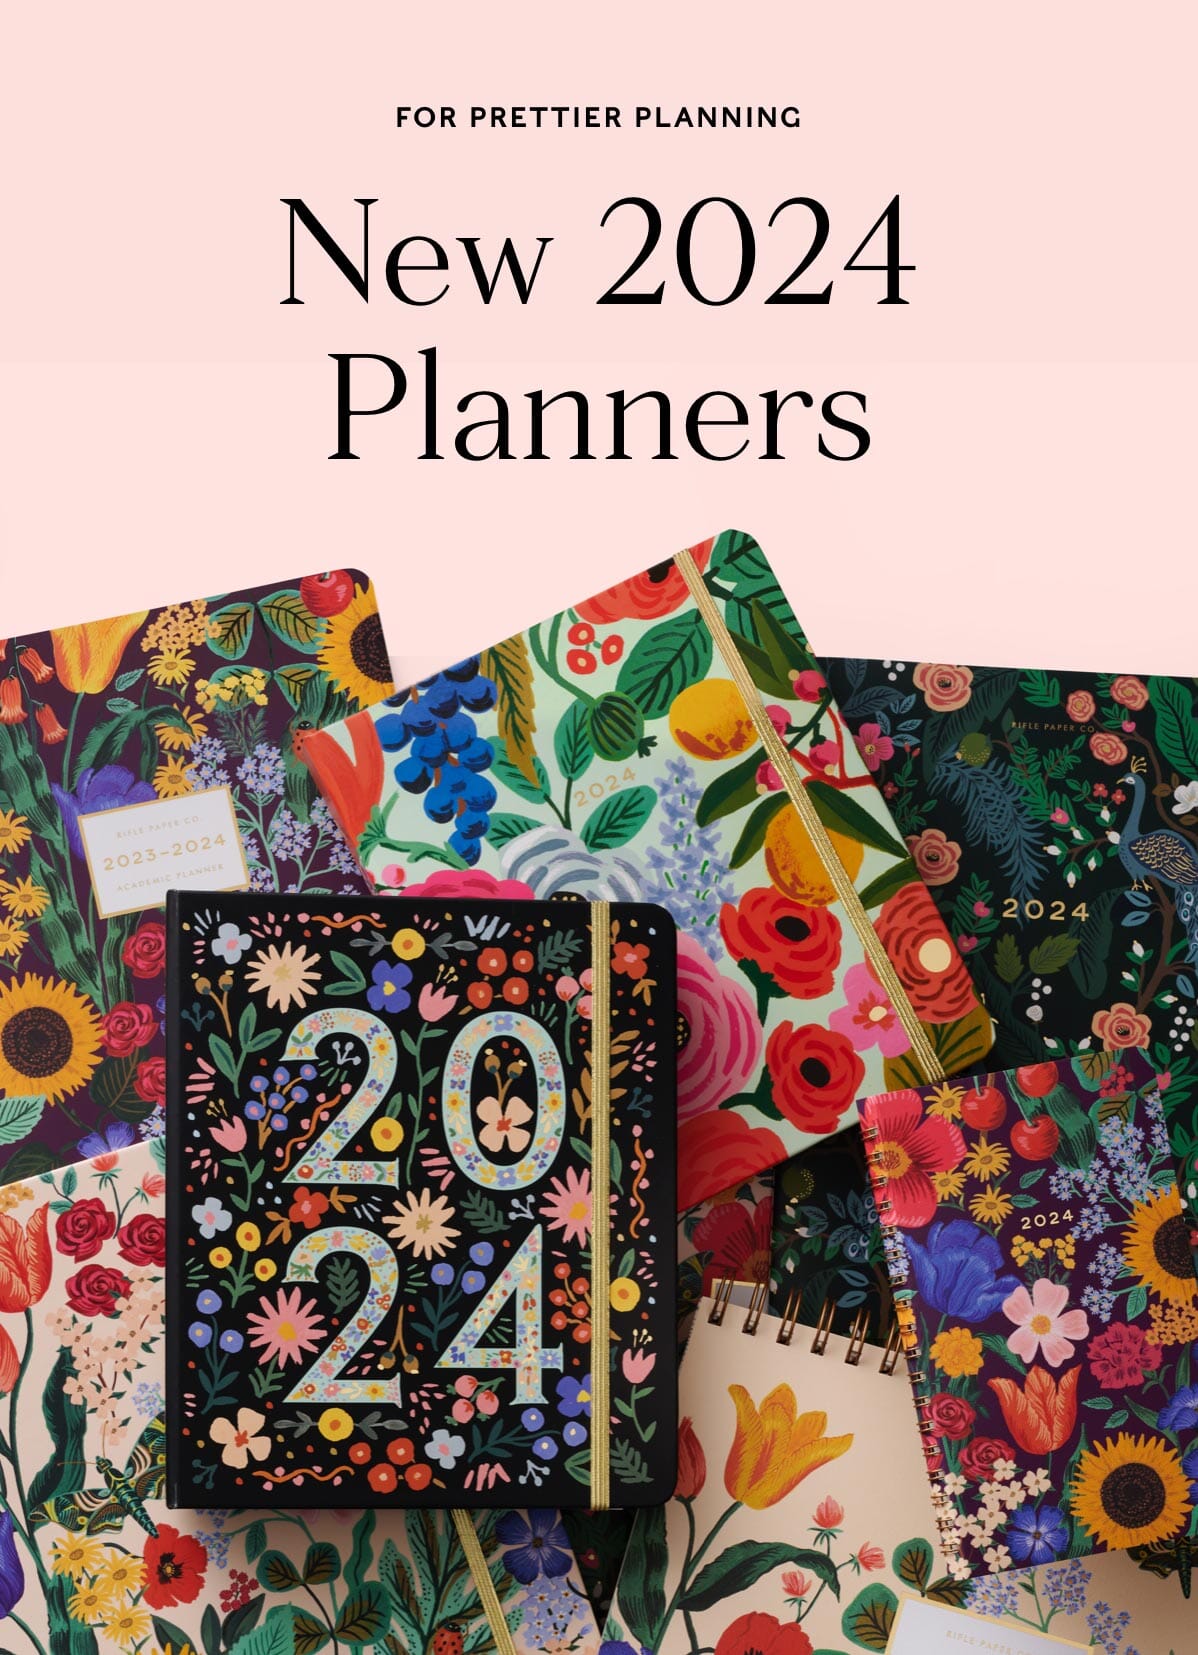 The 2024 Planner Collection